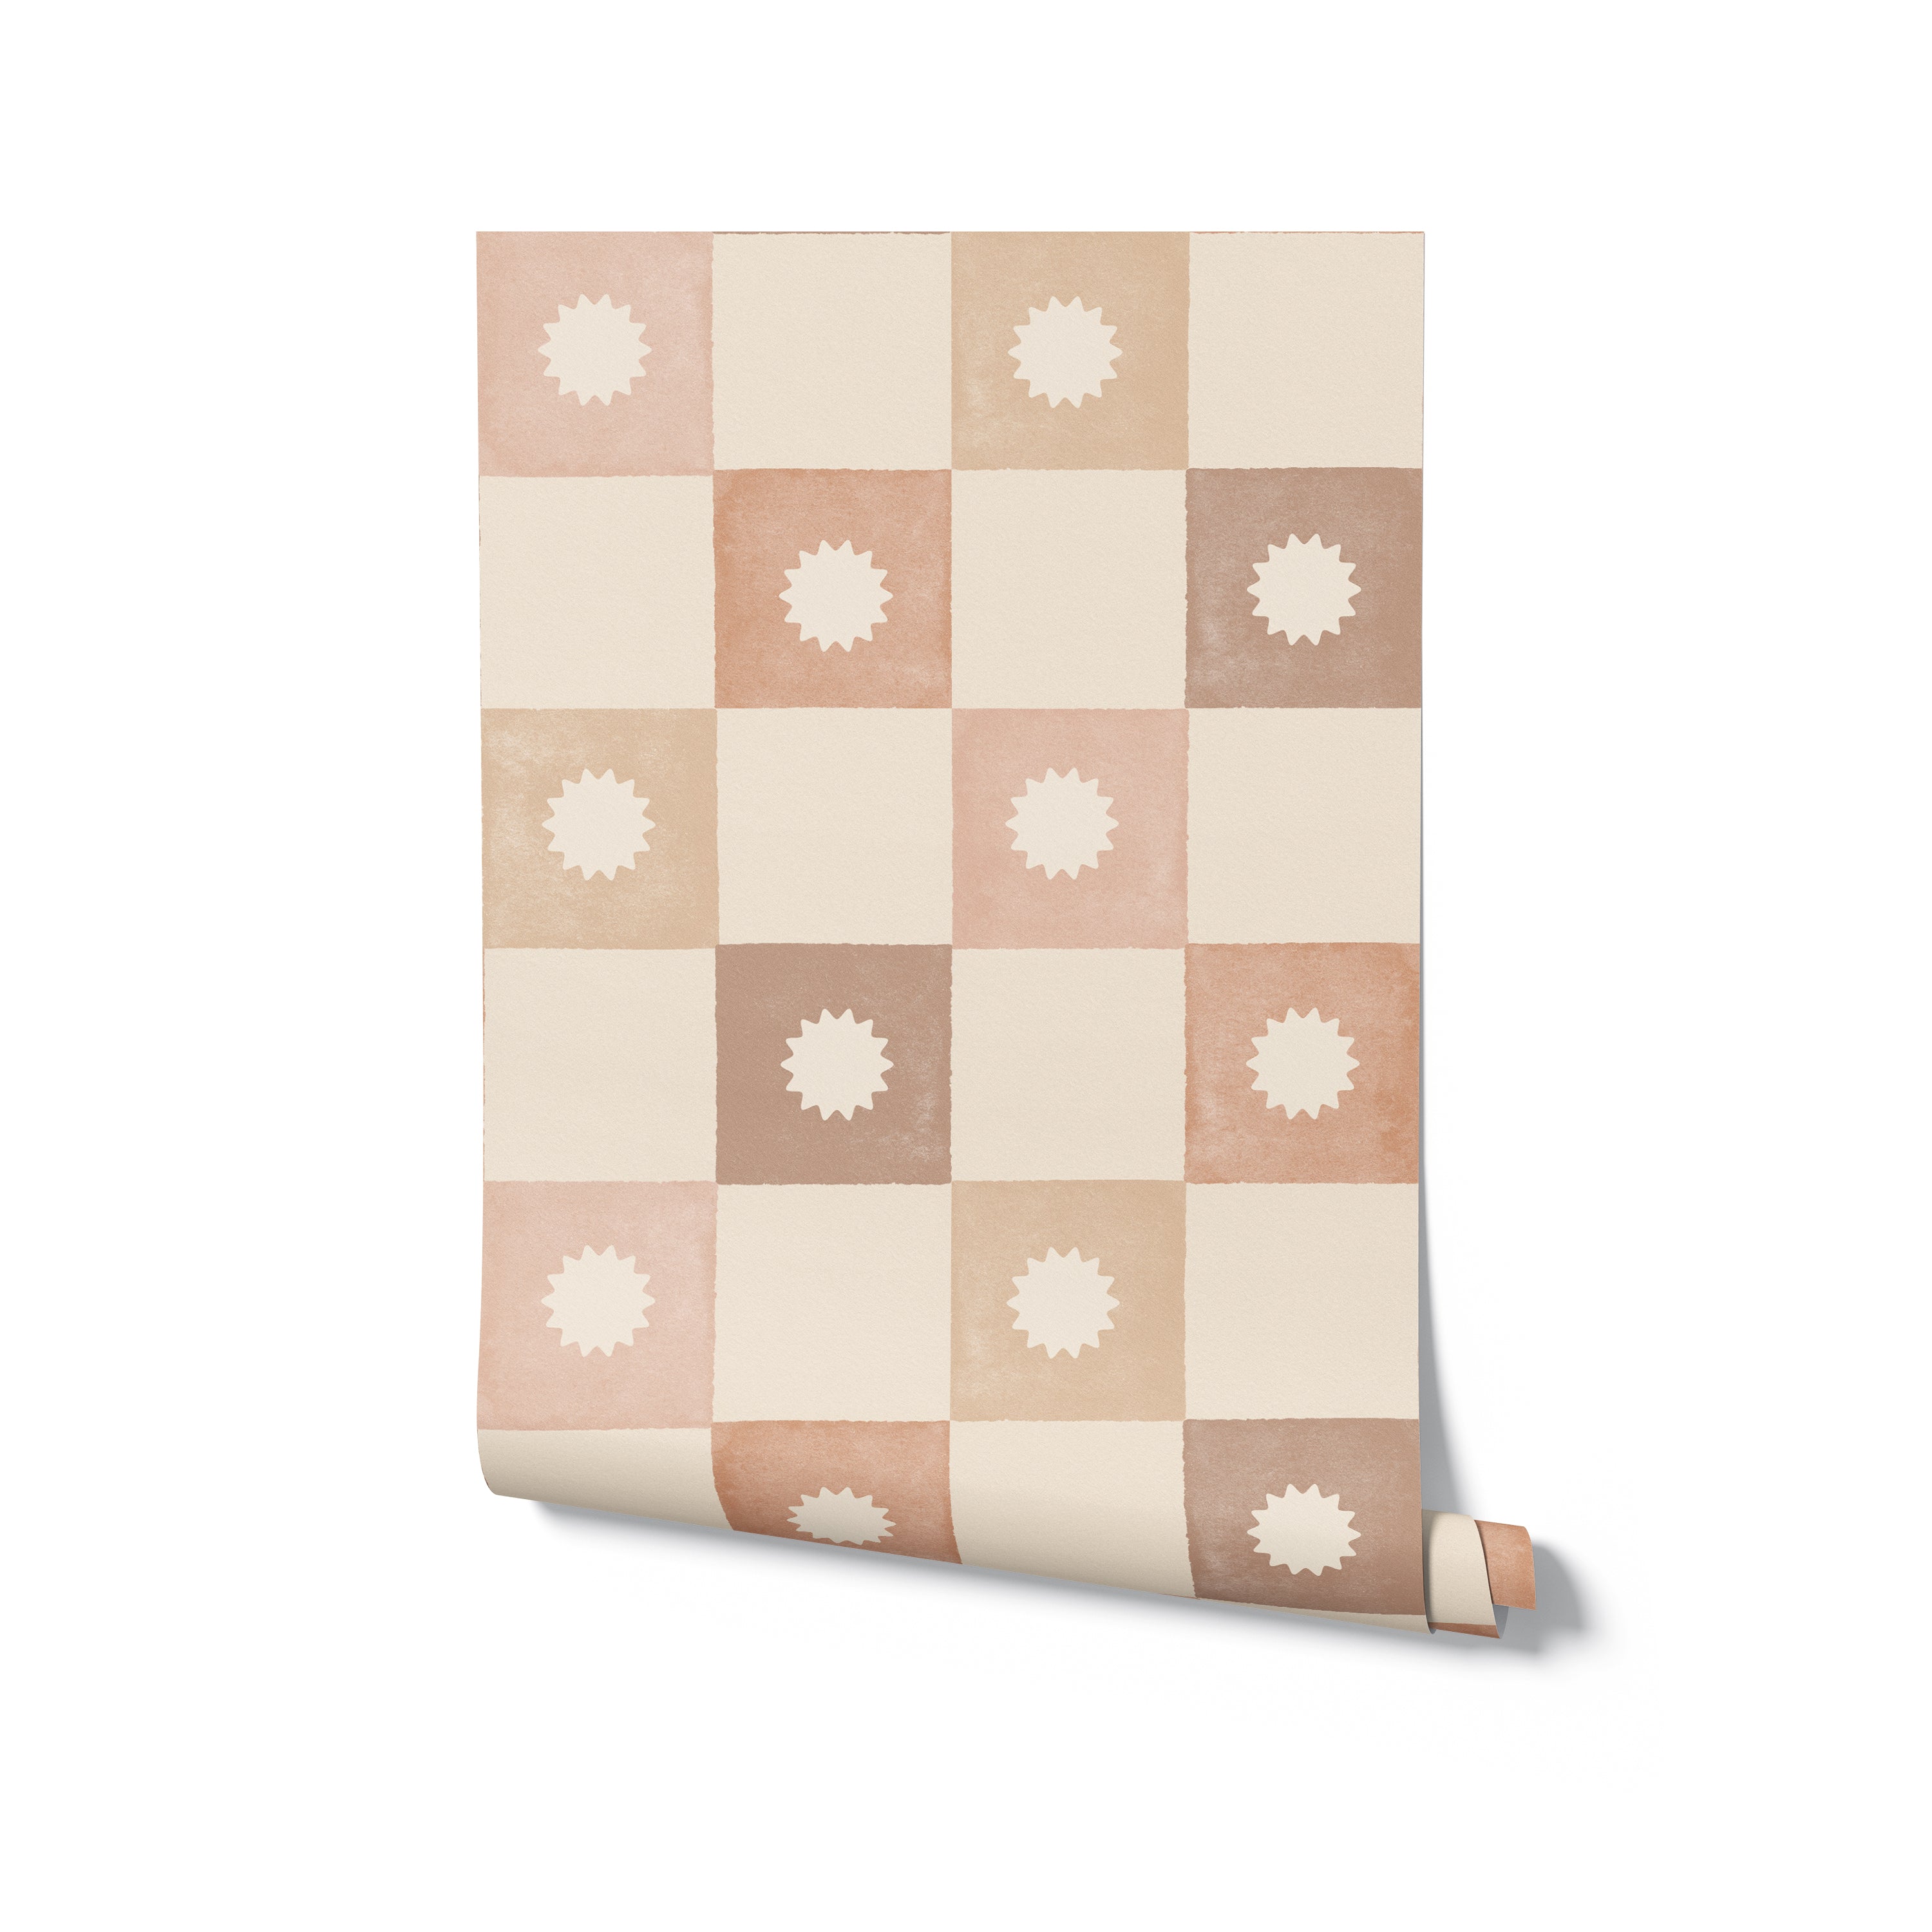 Roll of Marie Wallpaper displaying a soft pastel checkered pattern with a distinctive white starburst in each square, blending classic design with a touch of whimsy, perfect for a child's room or a creative space.